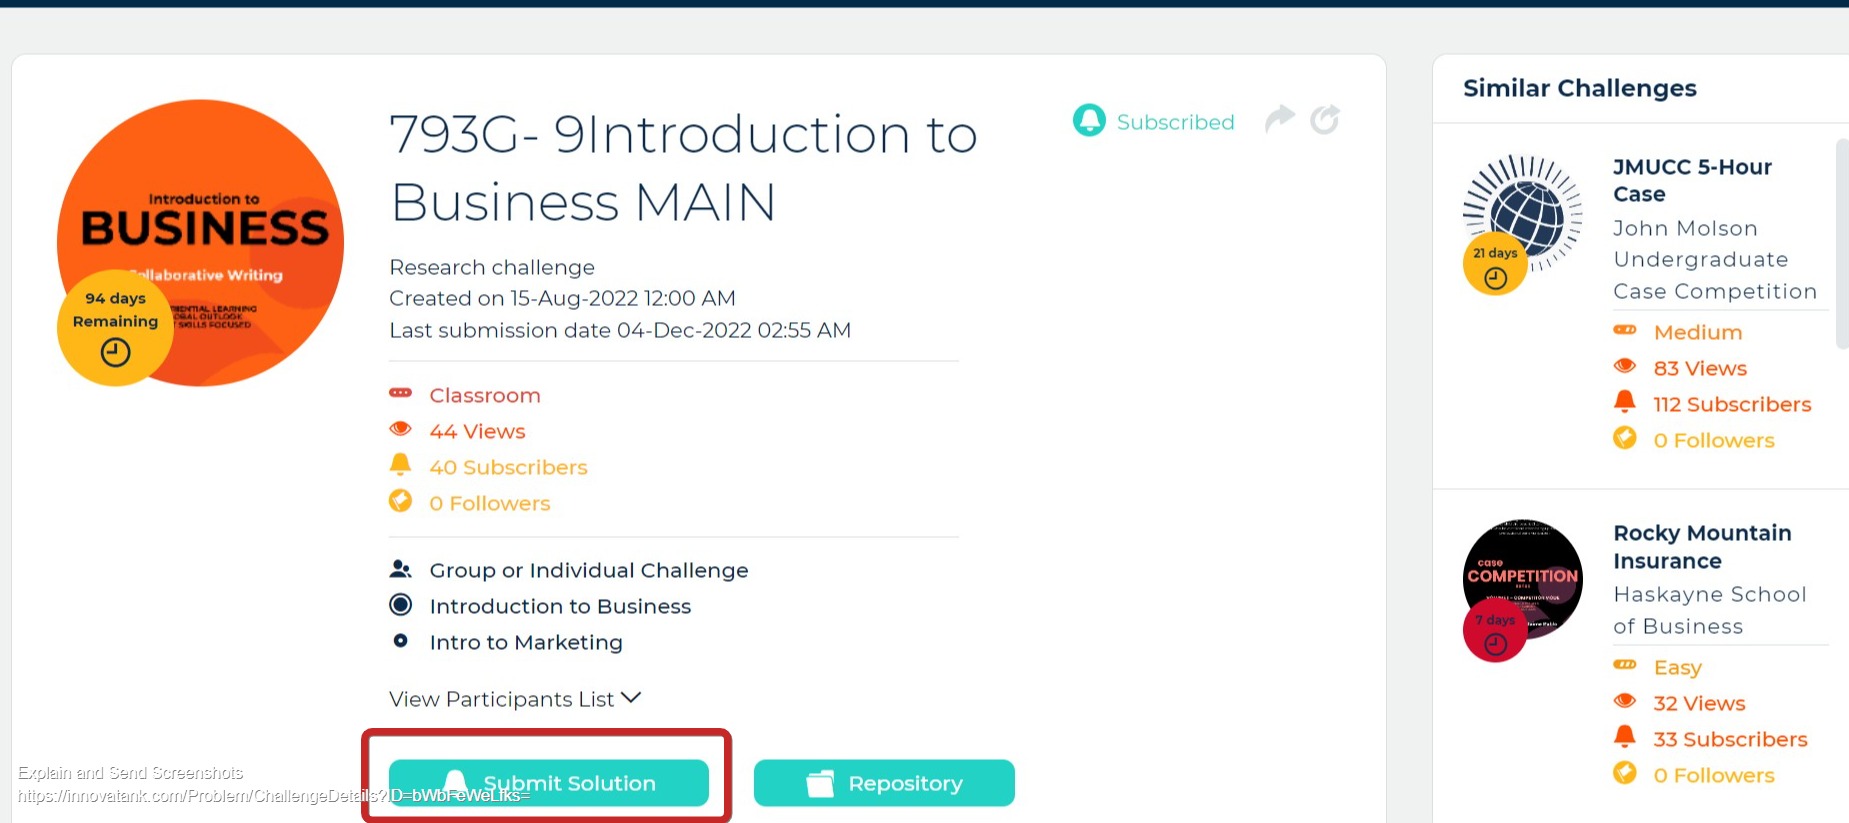 Challenge/Course Details-Submit Solution